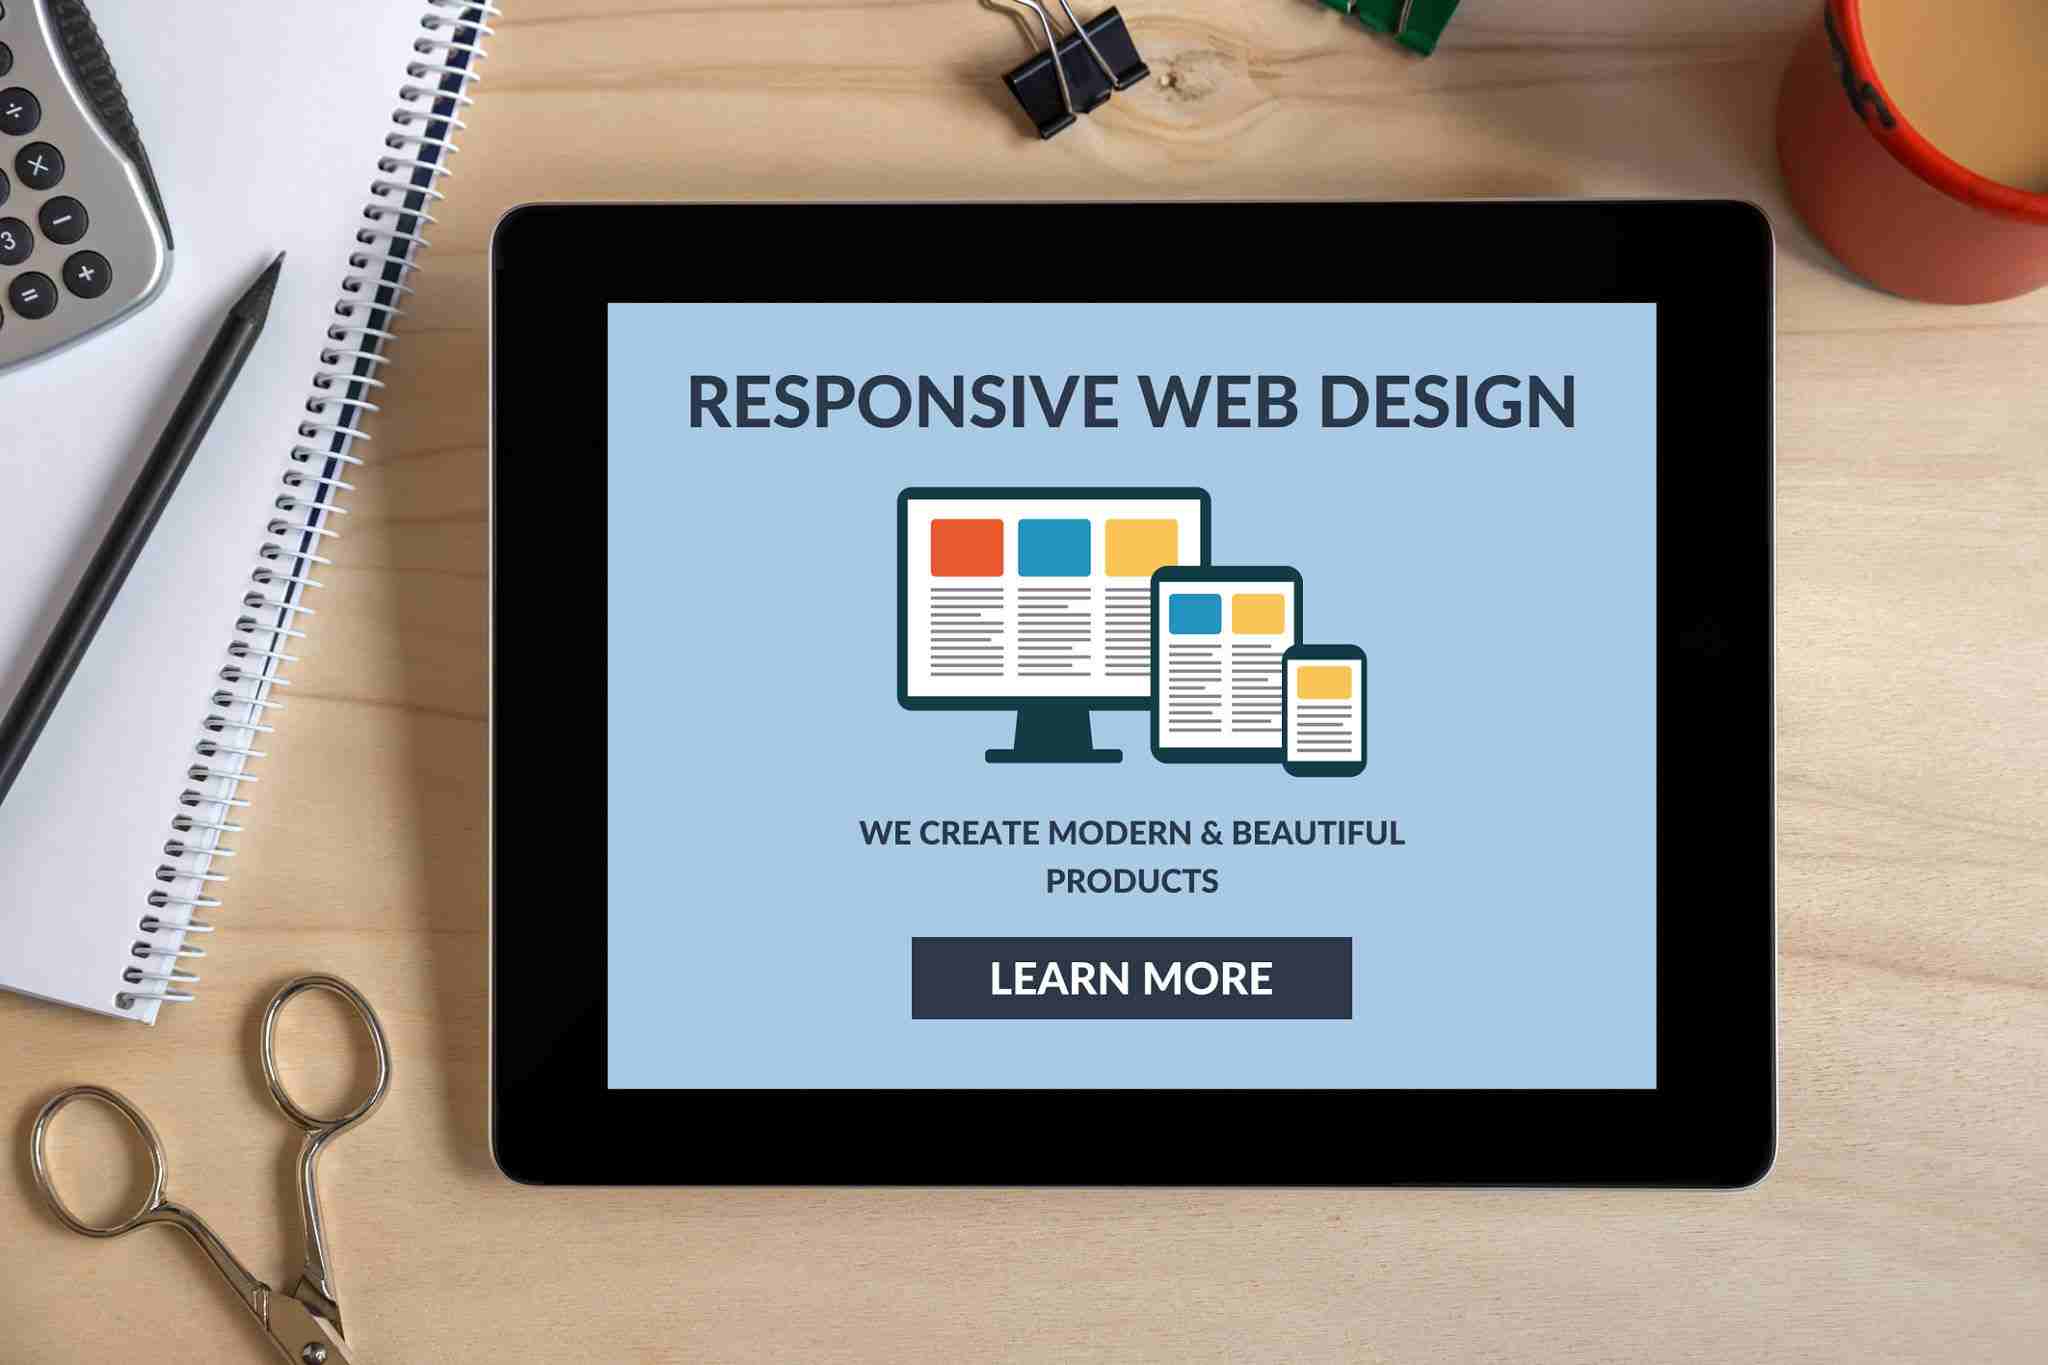 Responsive Design for Mobile Users